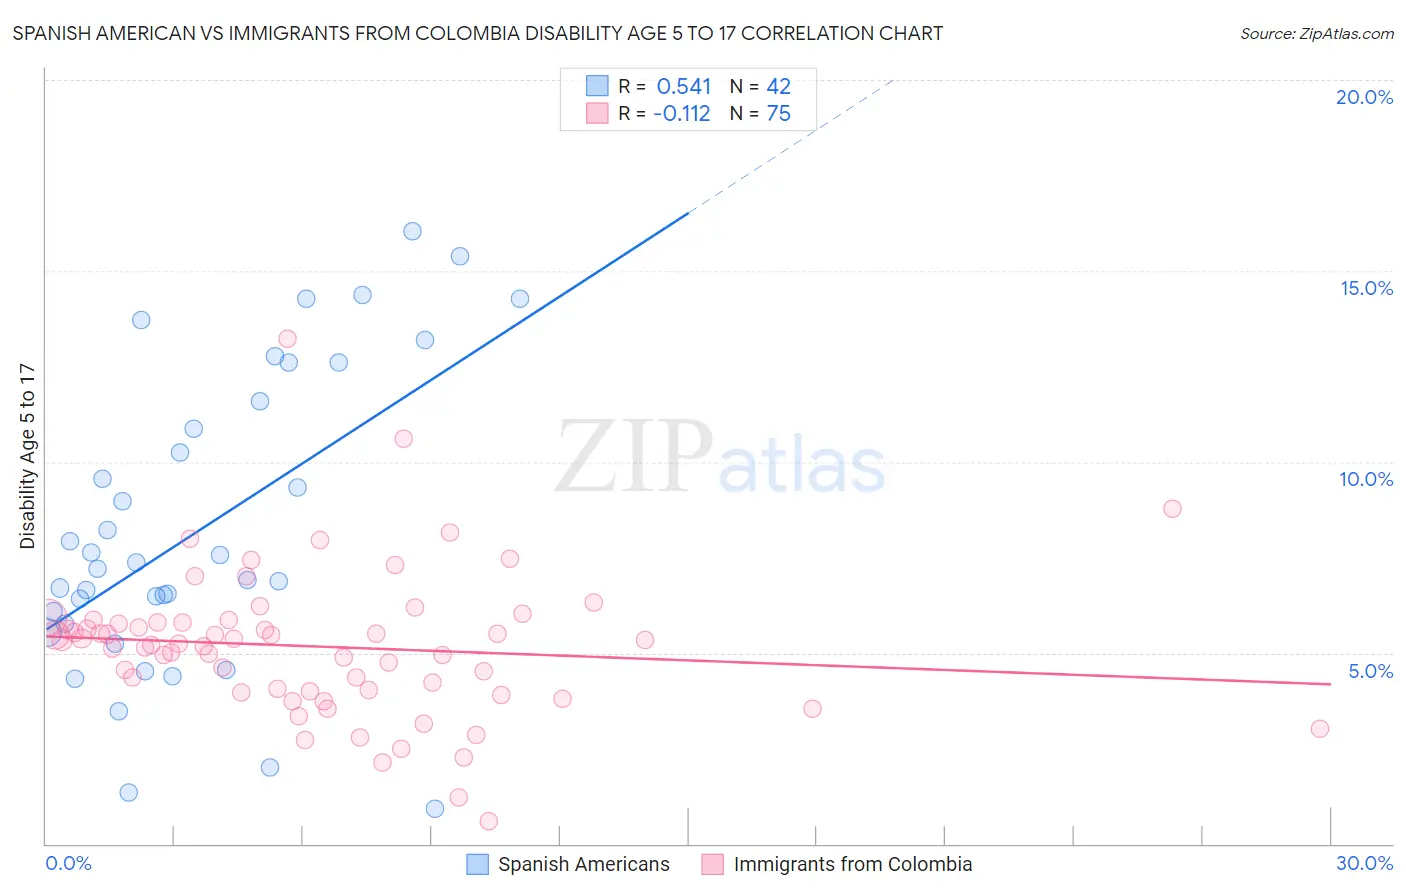 Spanish American vs Immigrants from Colombia Disability Age 5 to 17